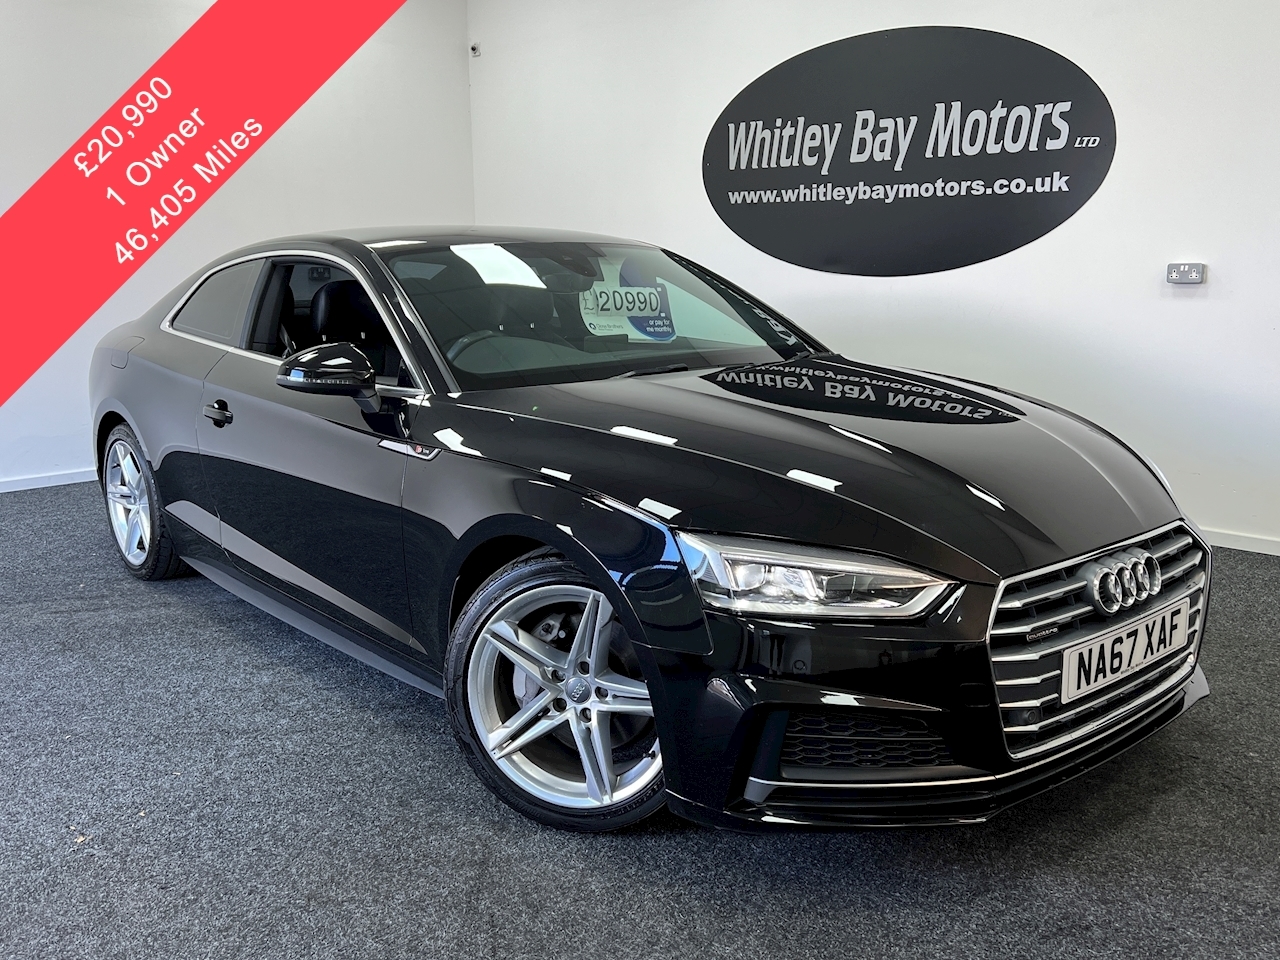 2.0 TDI S line Coupe 2dr Diesel S Tronic quattro (s/s) (190 ps)